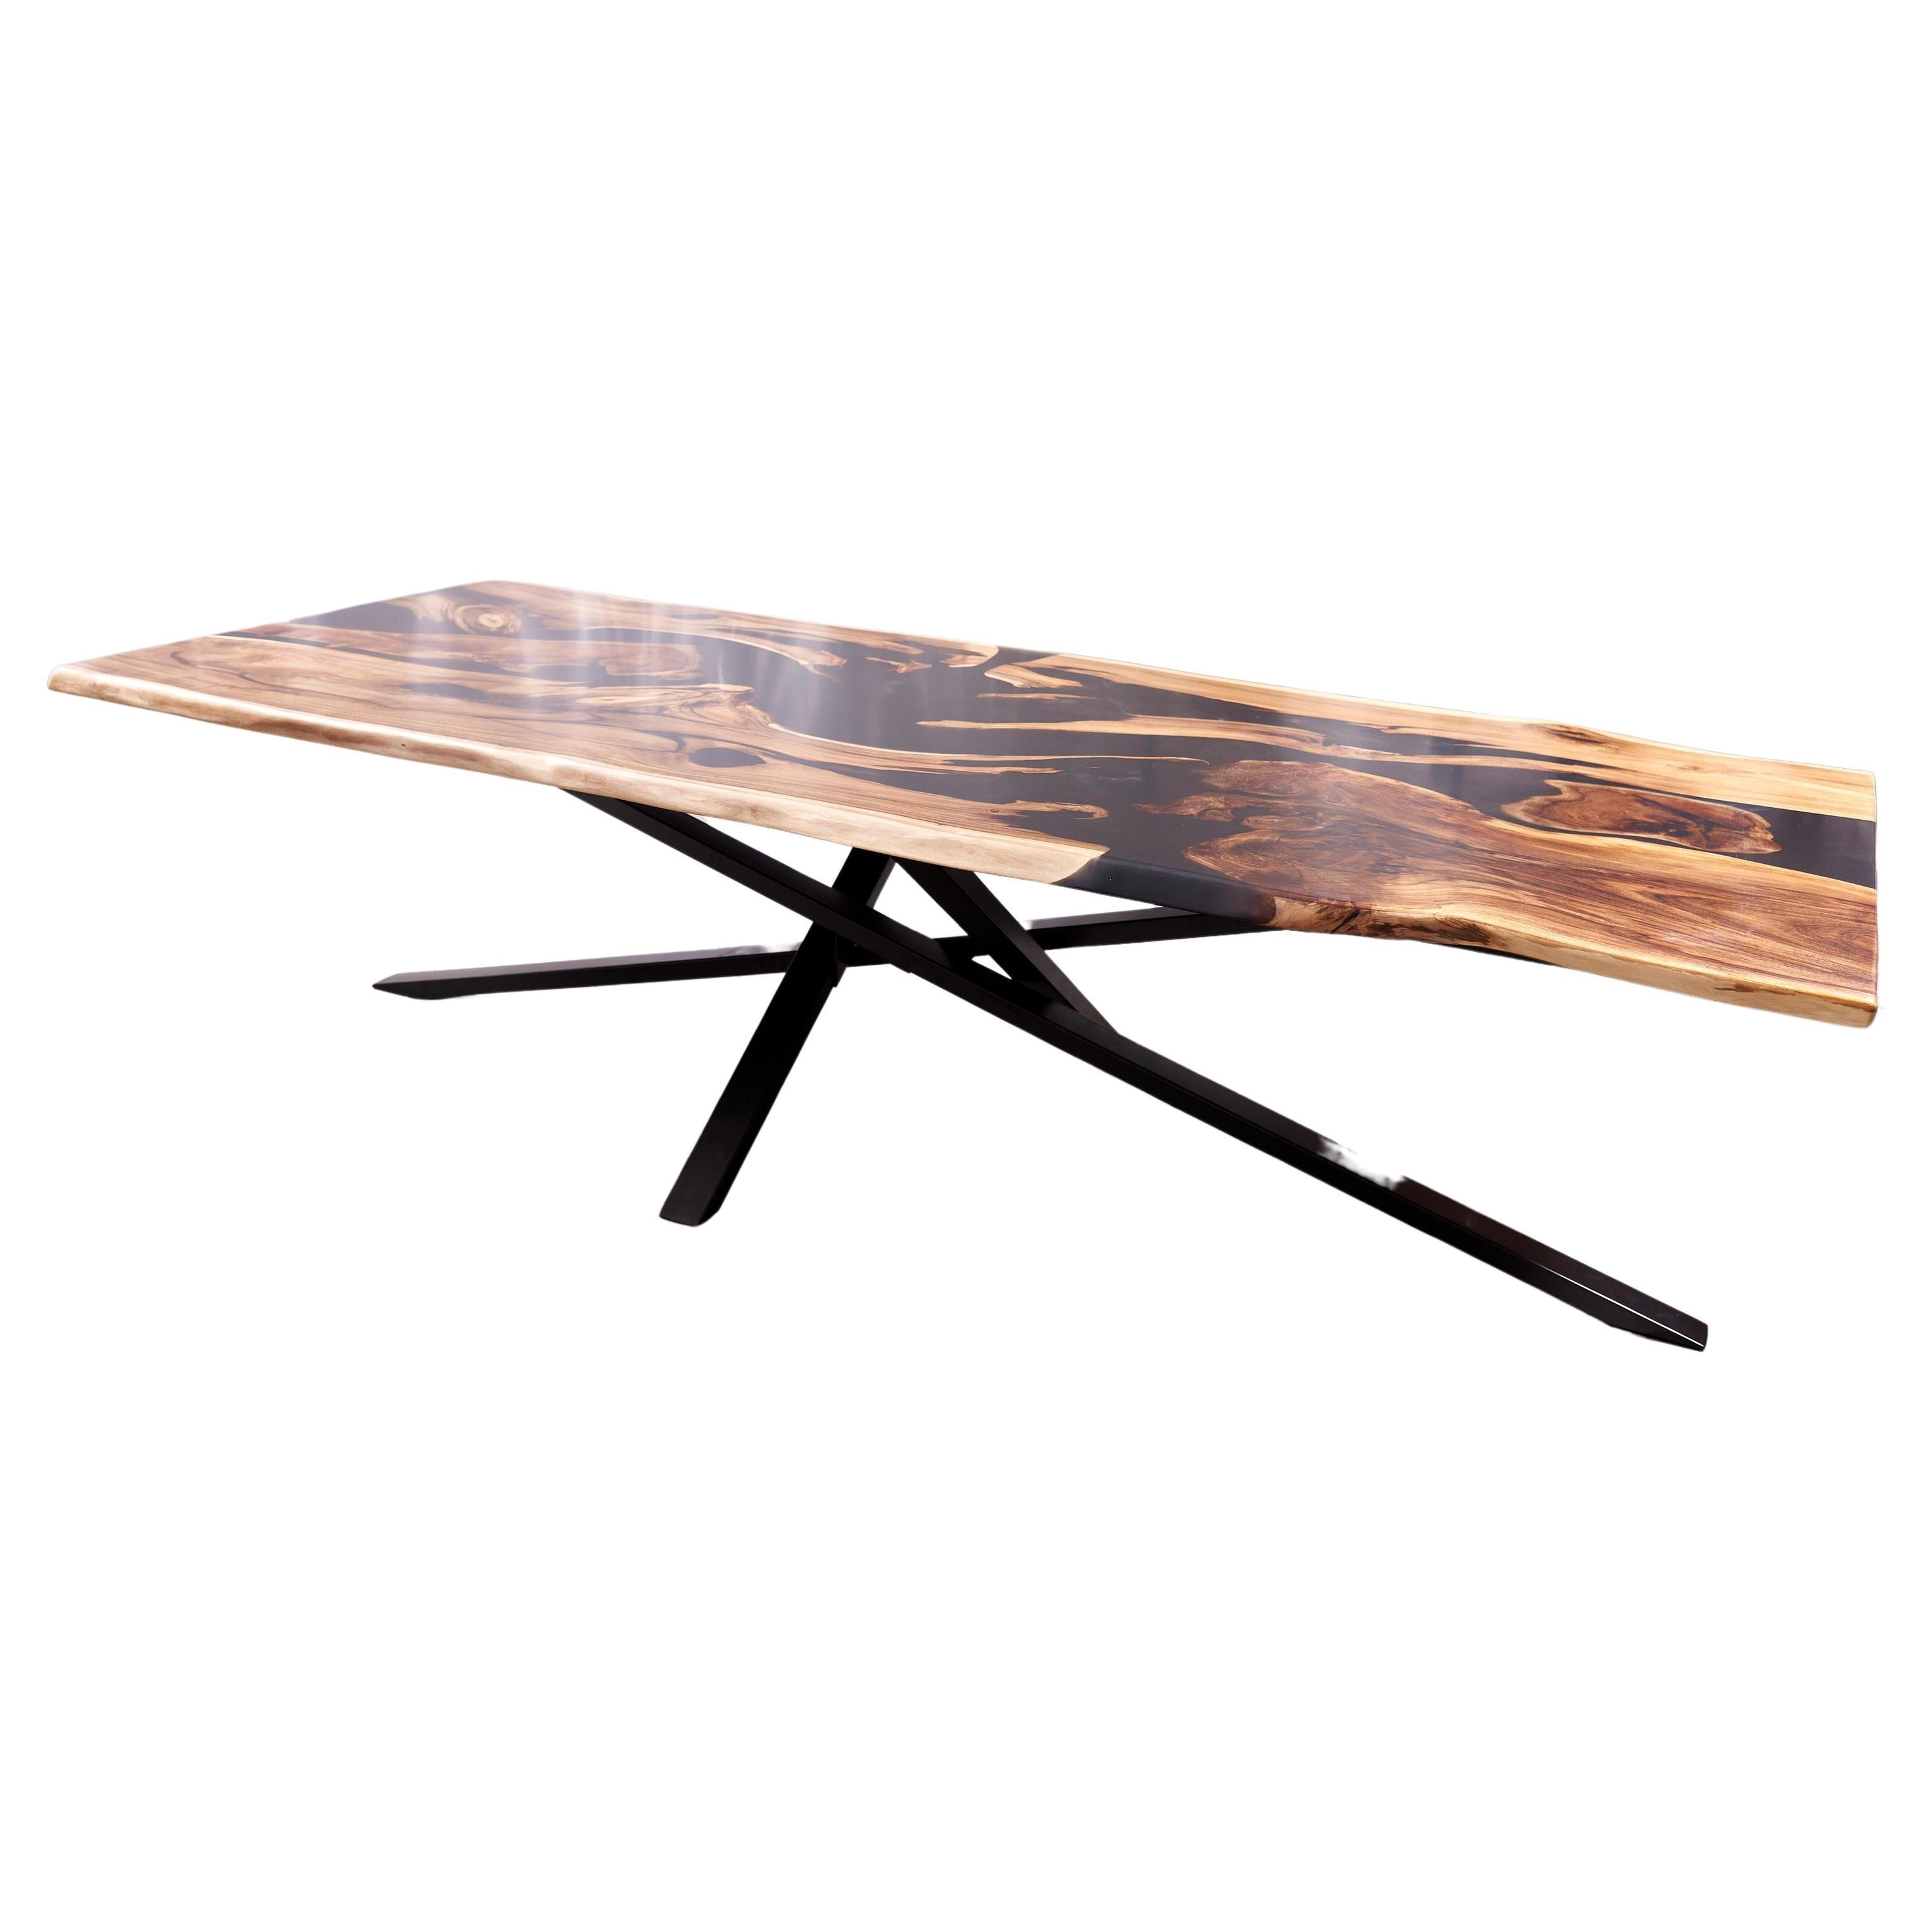 Modern Dining Table Large Rustic Walnut Wood Table Handmade Tables For Sale